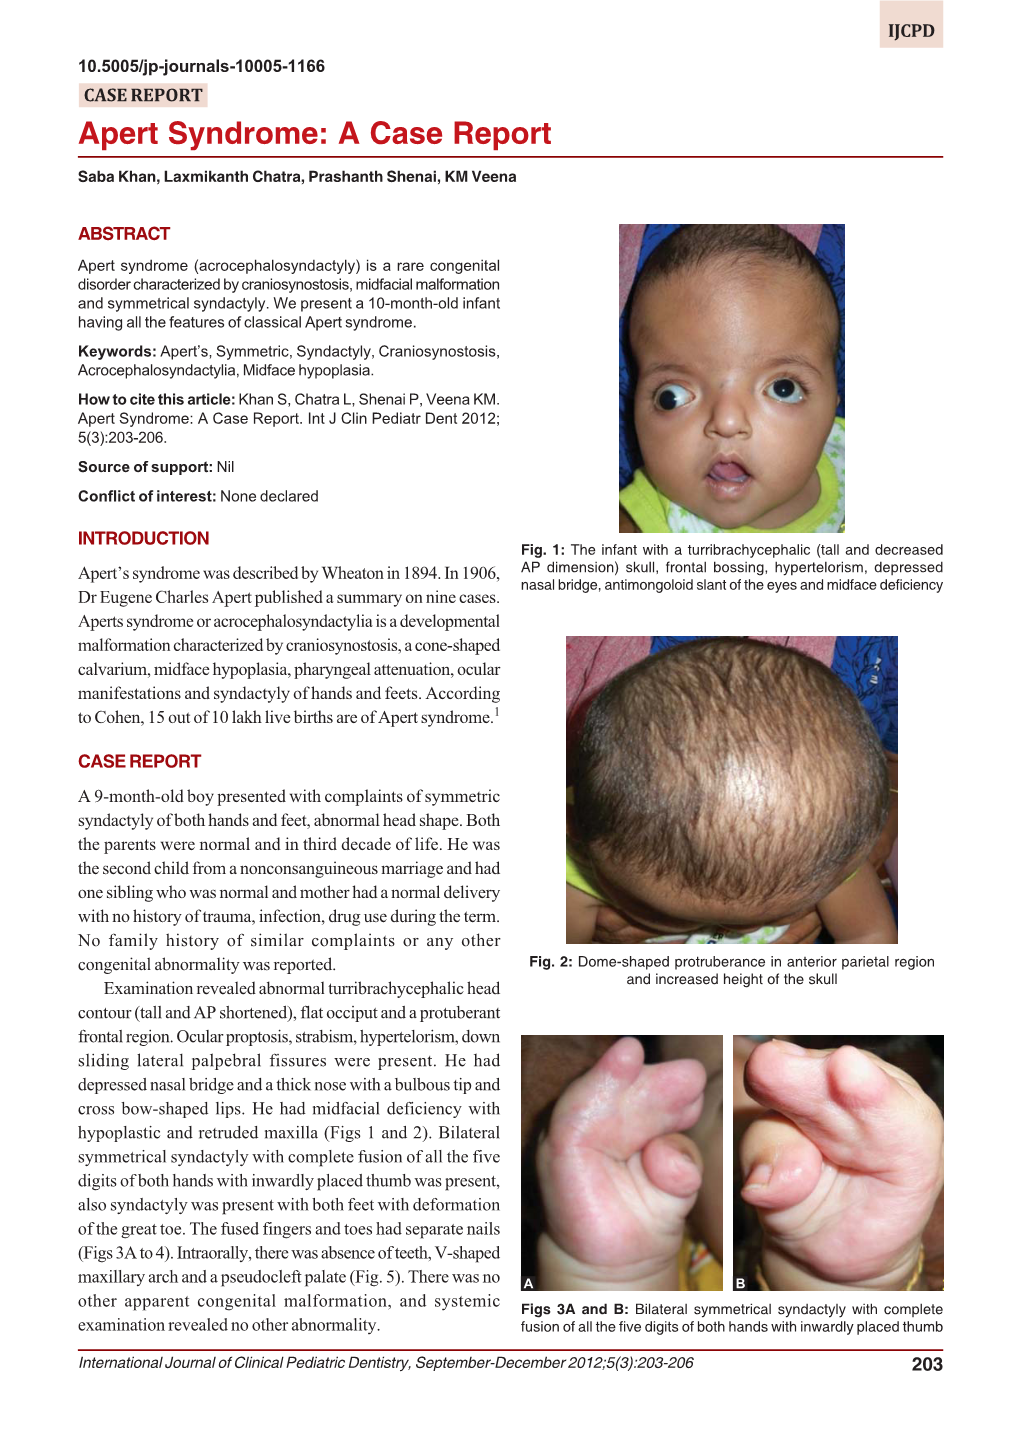 Apert Syndrome: a Case Report Apert Syndrome: a Case Report